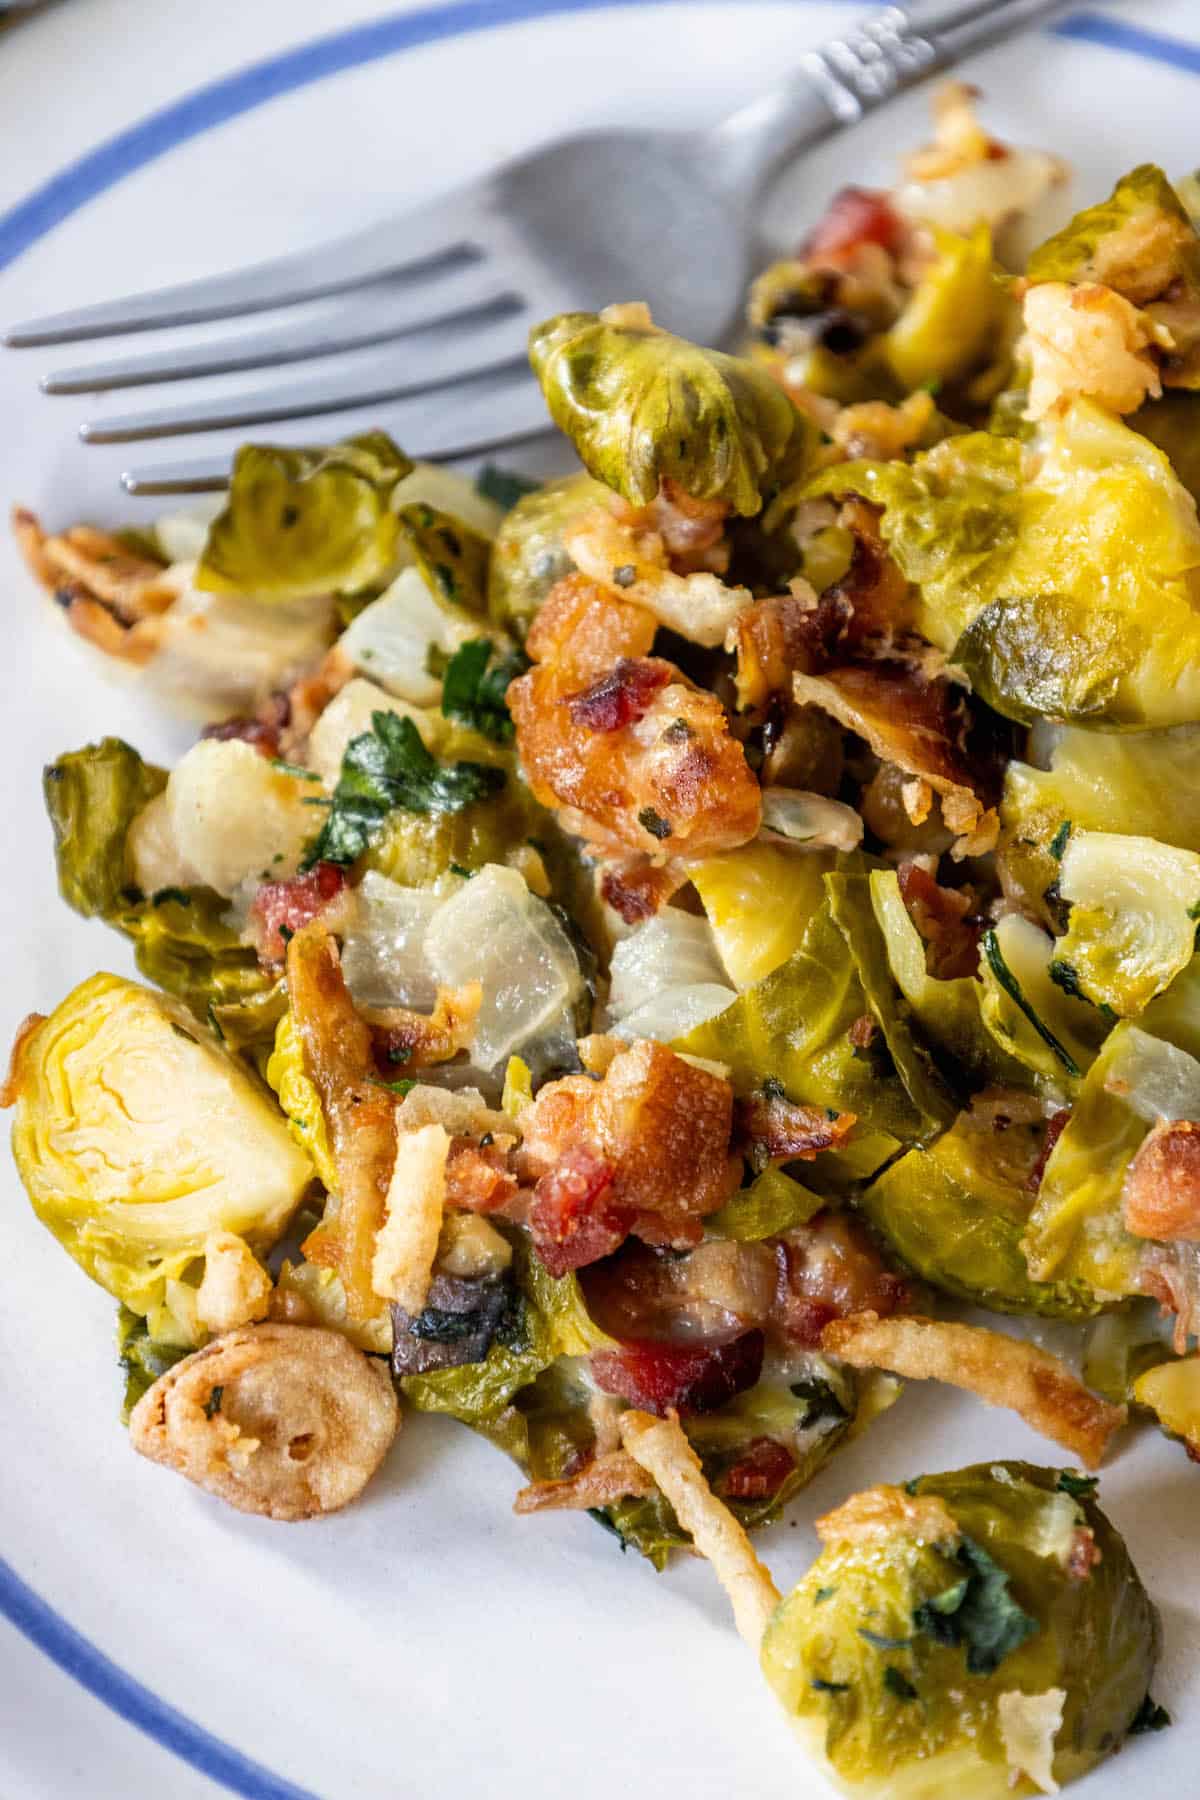 Creamy Brussels sprouts with bacon on a plate.